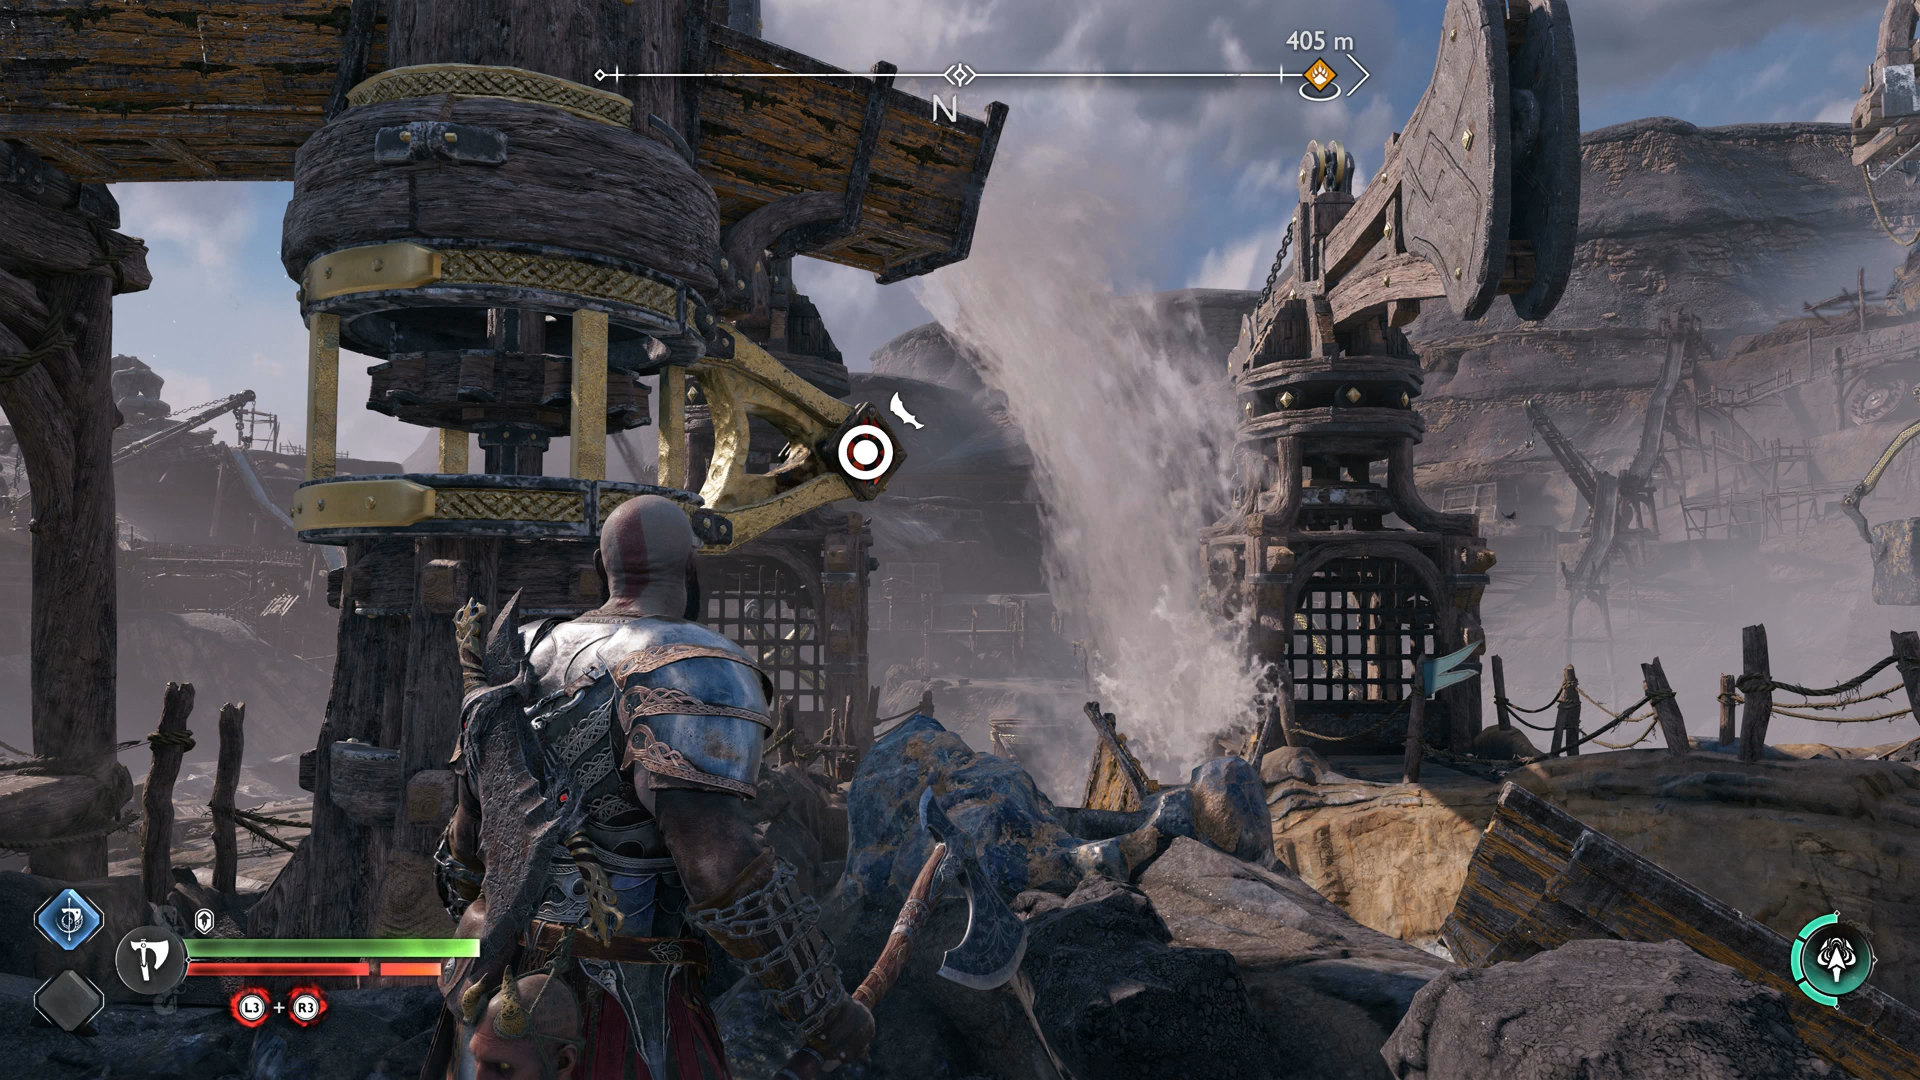 Kratos using his Blades of Chaos to move a crane in God of War Ragnarok